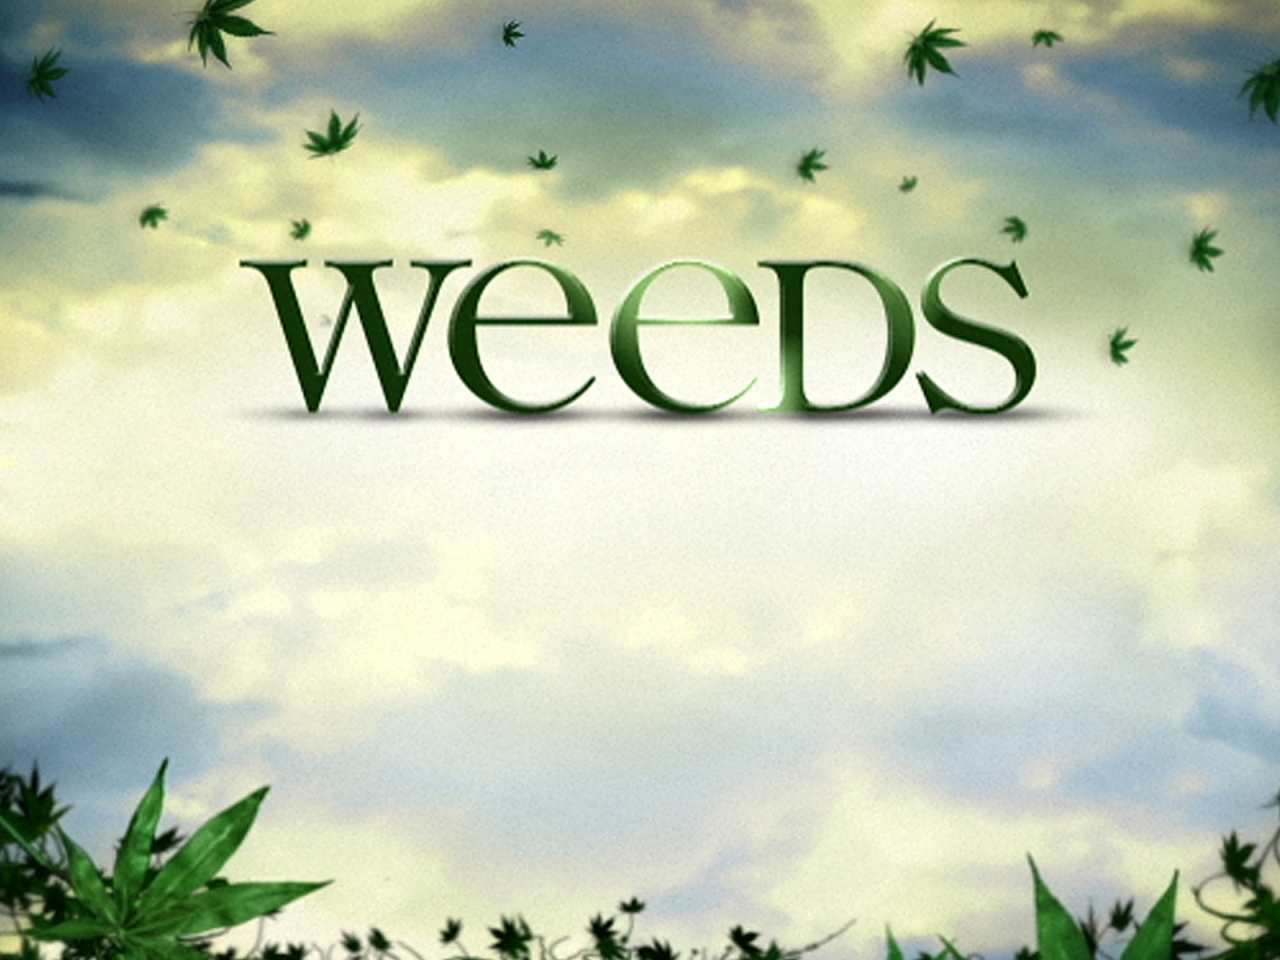 Weeds Logo for 1280 x 960 resolution